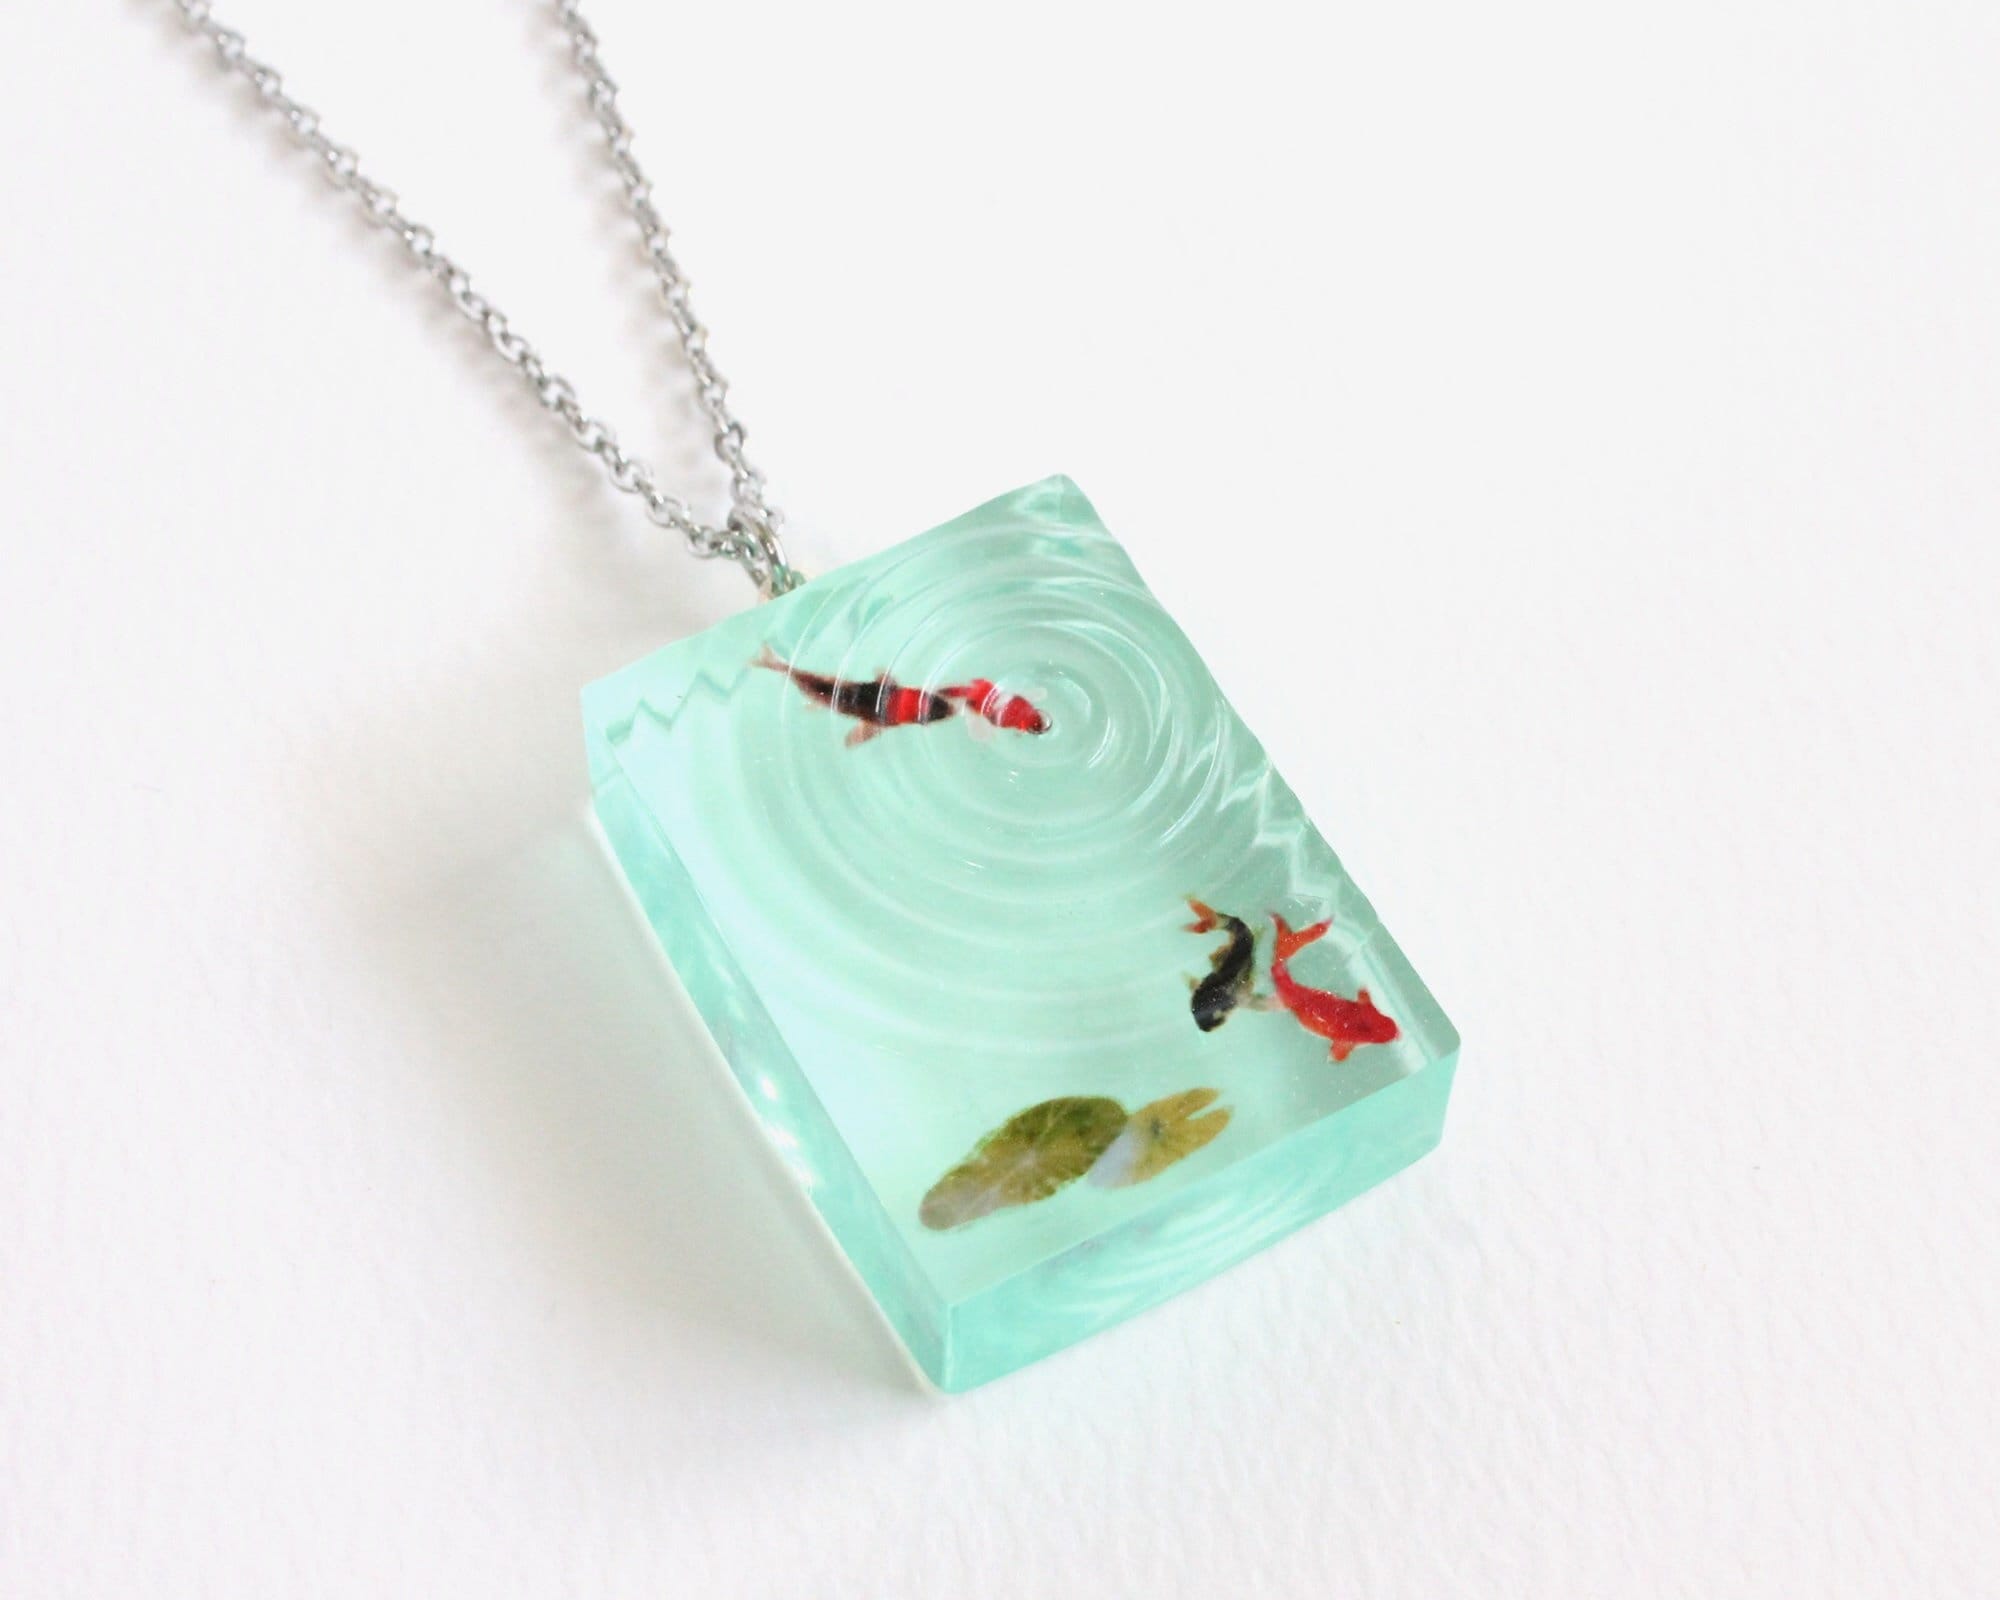 Japan koi fish necklace | Resin and polymer clay by Crystarbor on DeviantArt